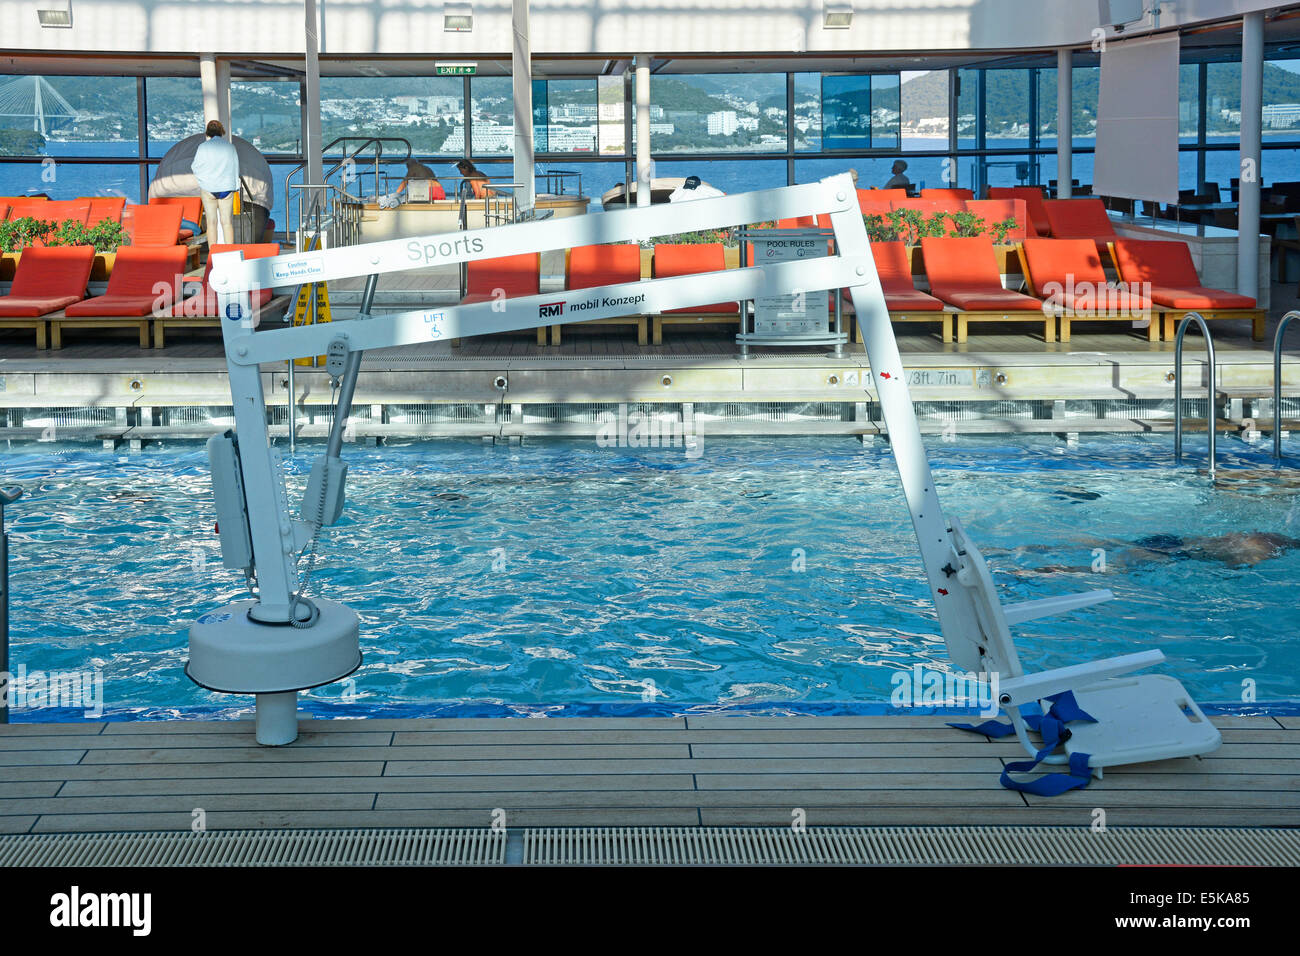 Hoist to assist people with disabilities to enter and leave the water in a cruise ship indoor swimming pool (ship in port Europe) Stock Photo